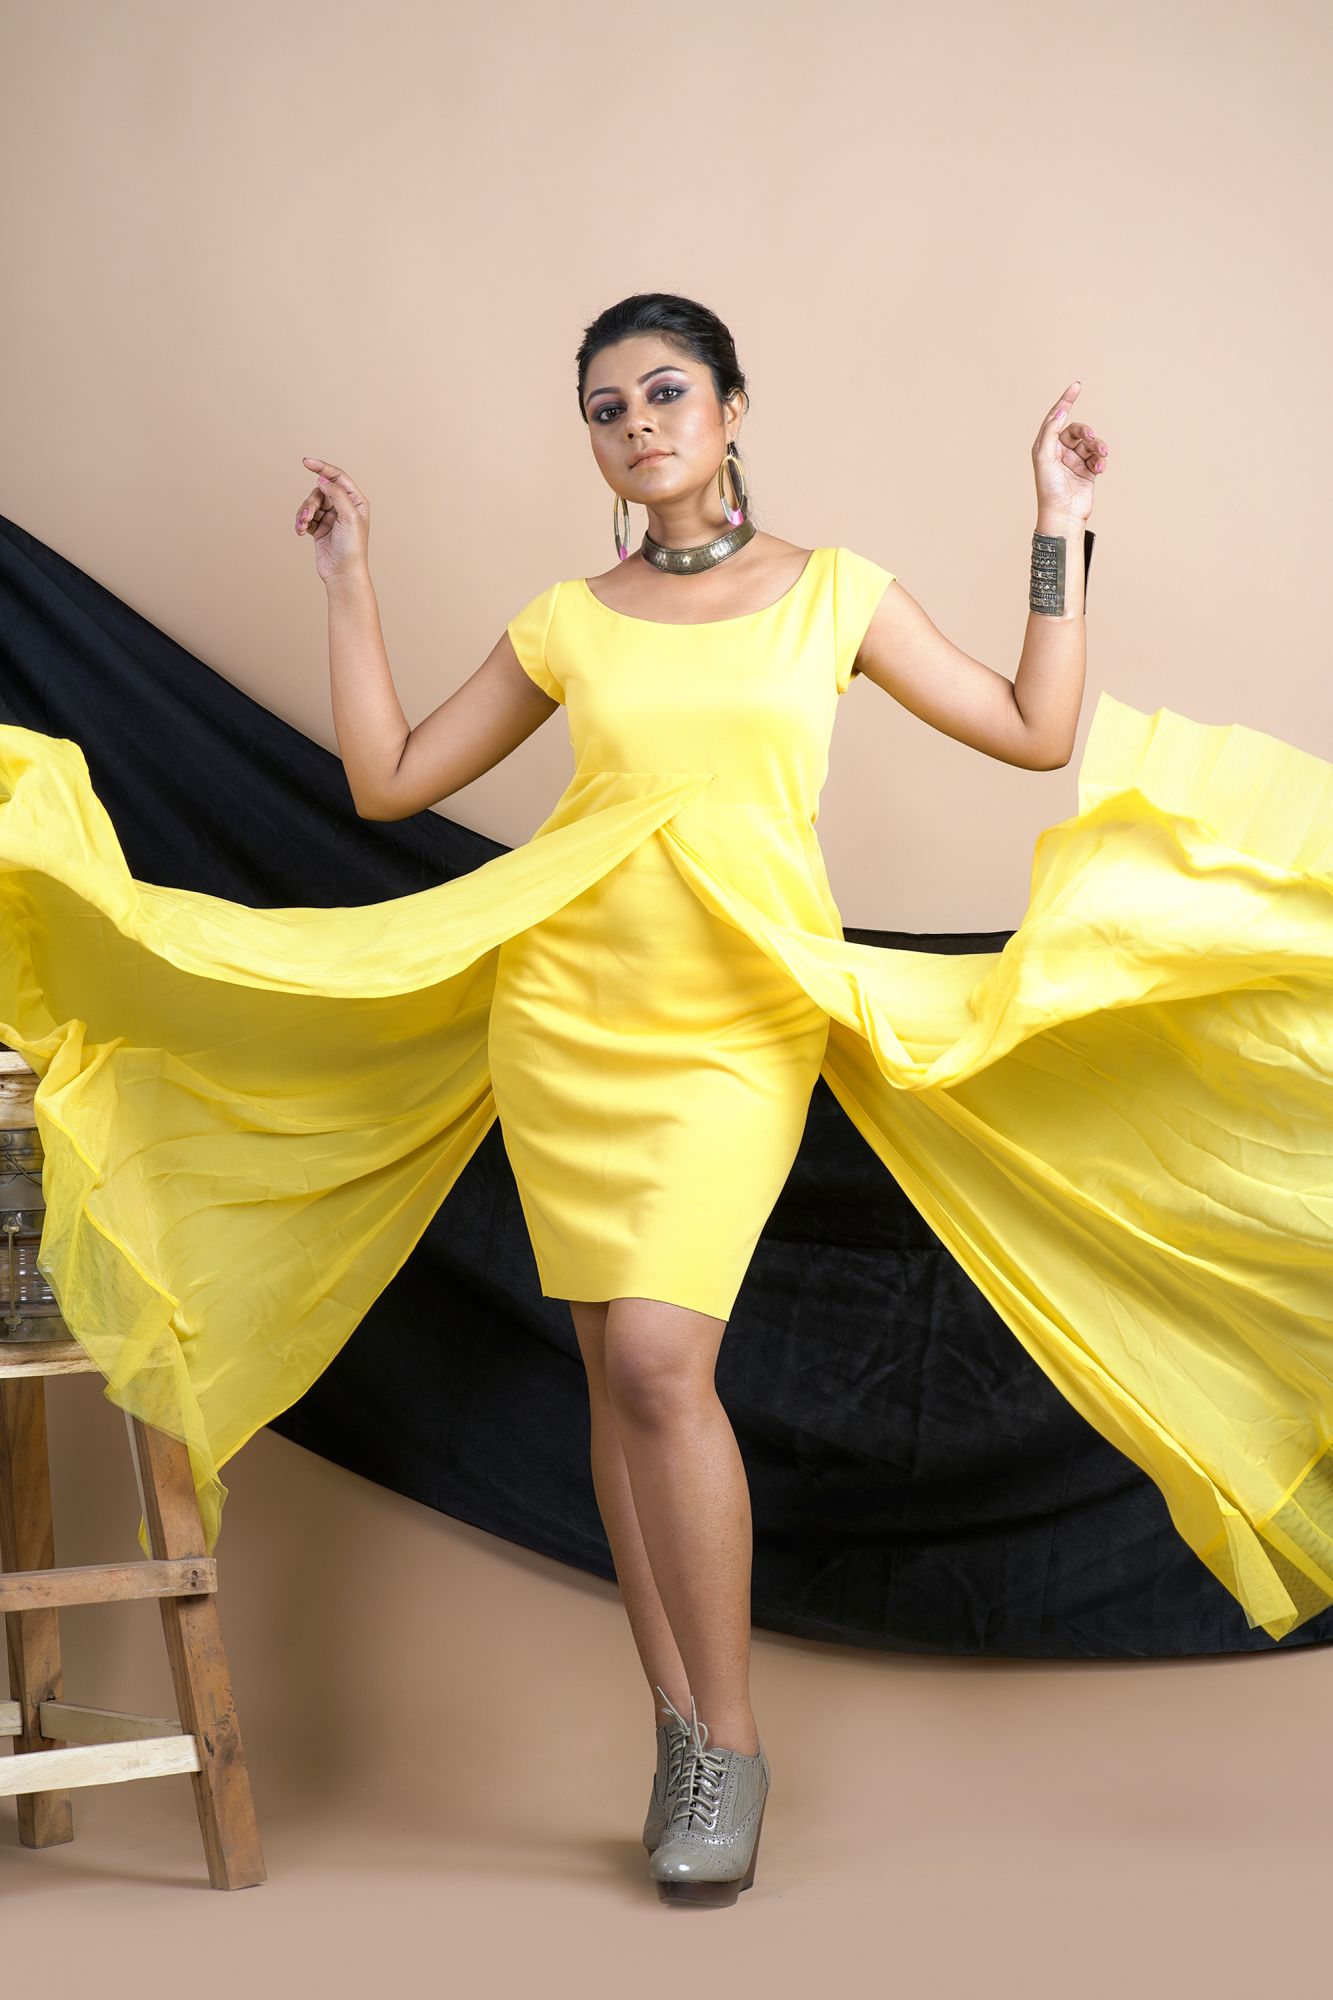 Yellow gown